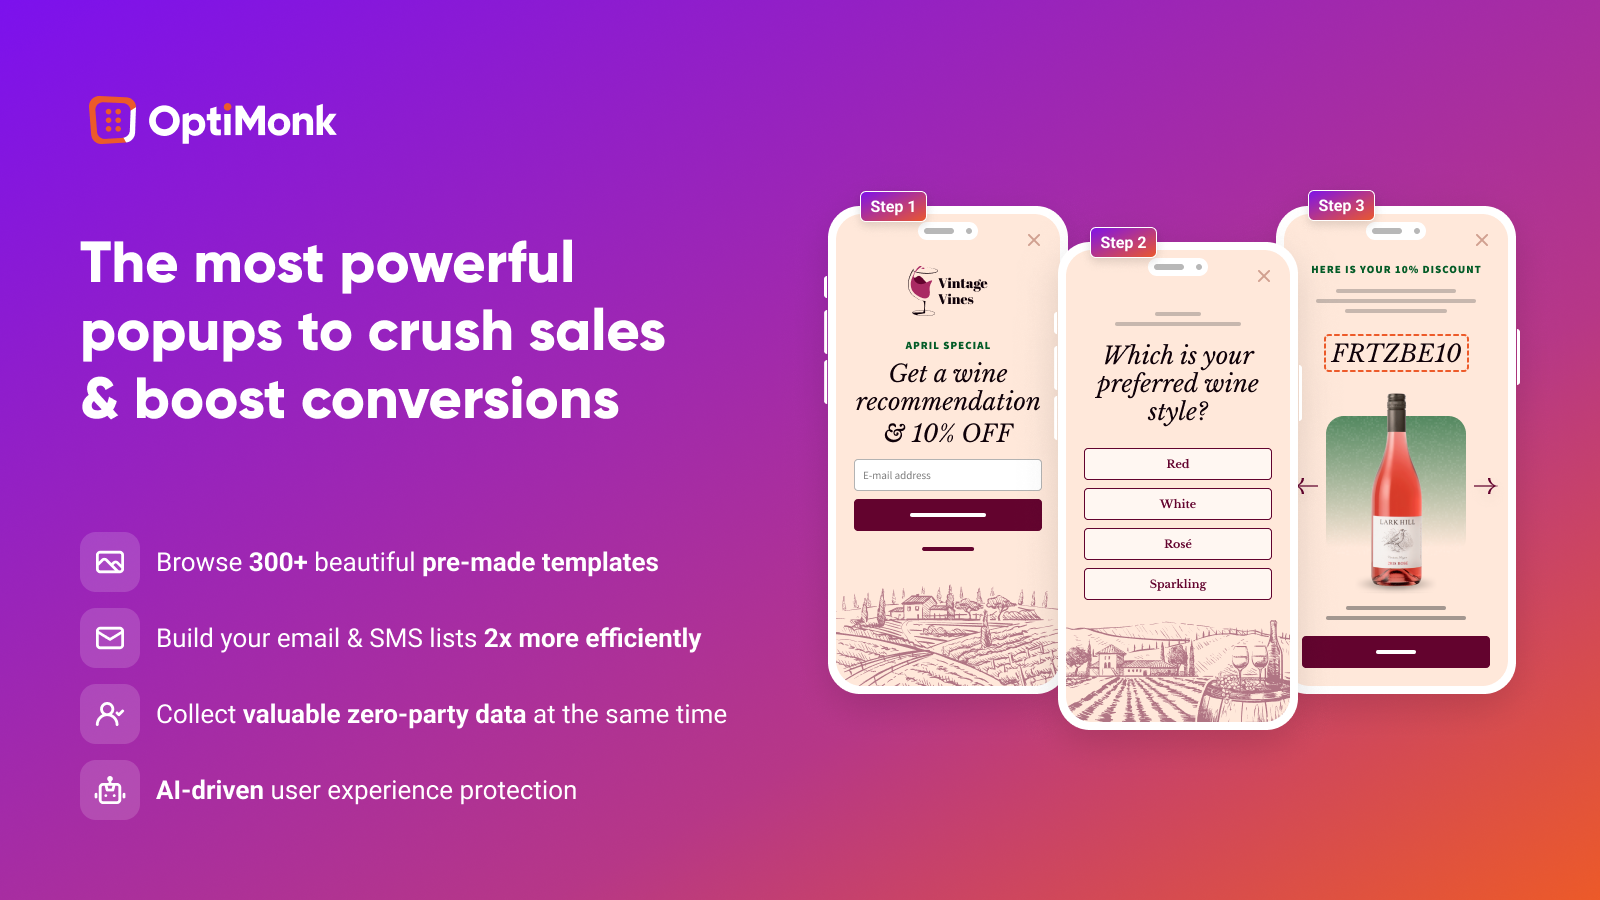 Grow your lists with smart popups built for conversions. Achieve 10-15% opt-in rates.